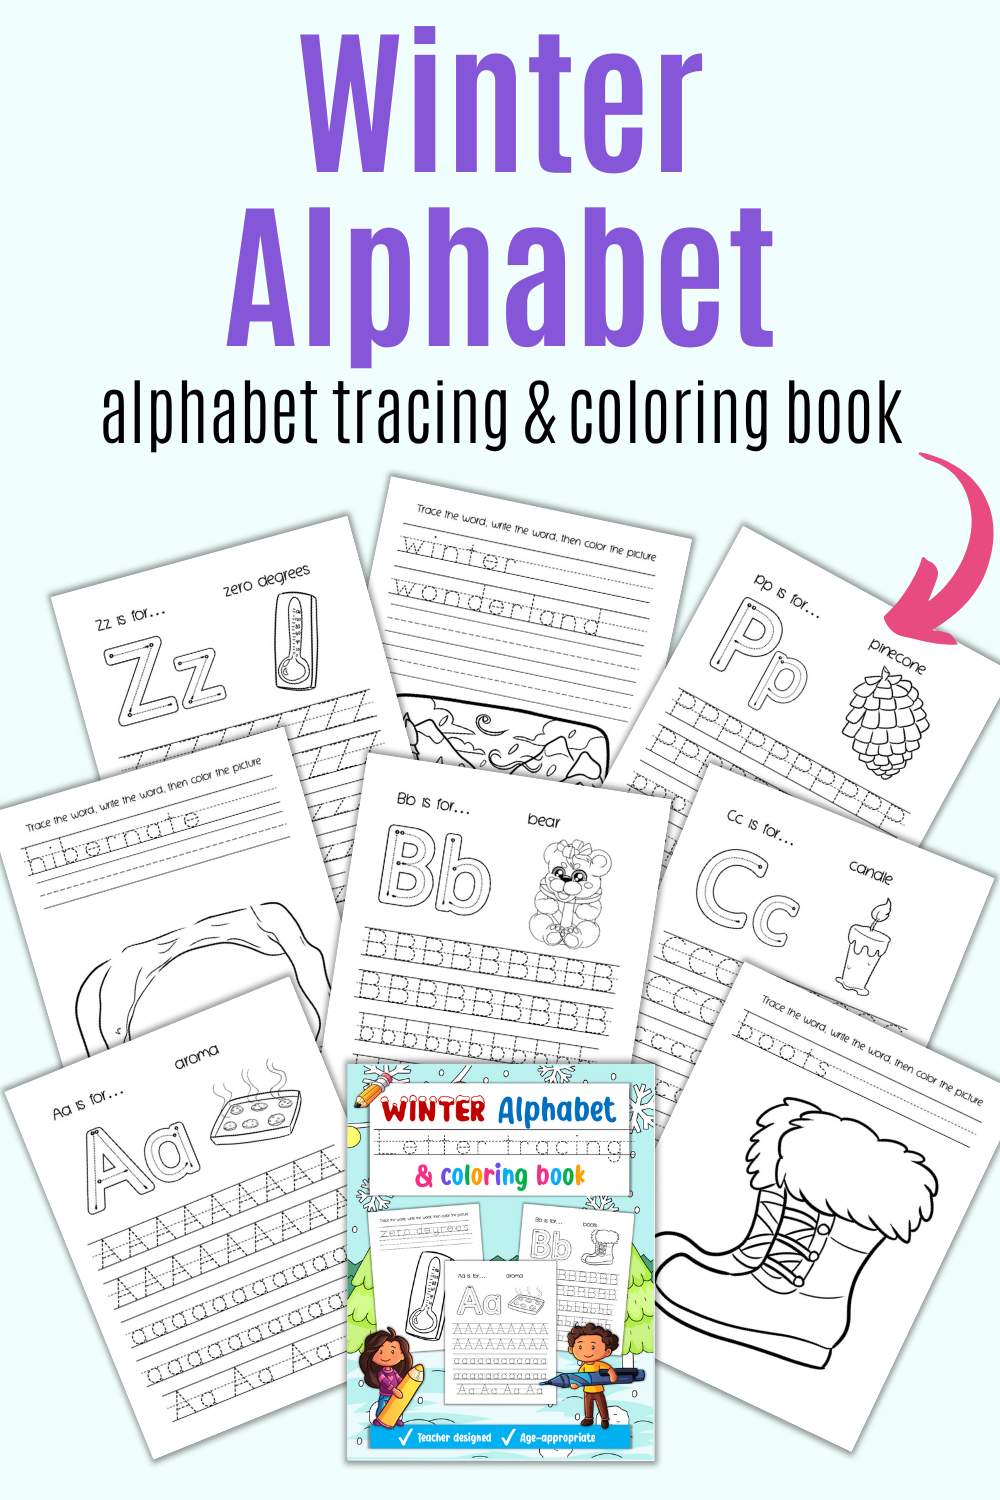 text "winter alphabet tracing and coloring book" with a preview of images